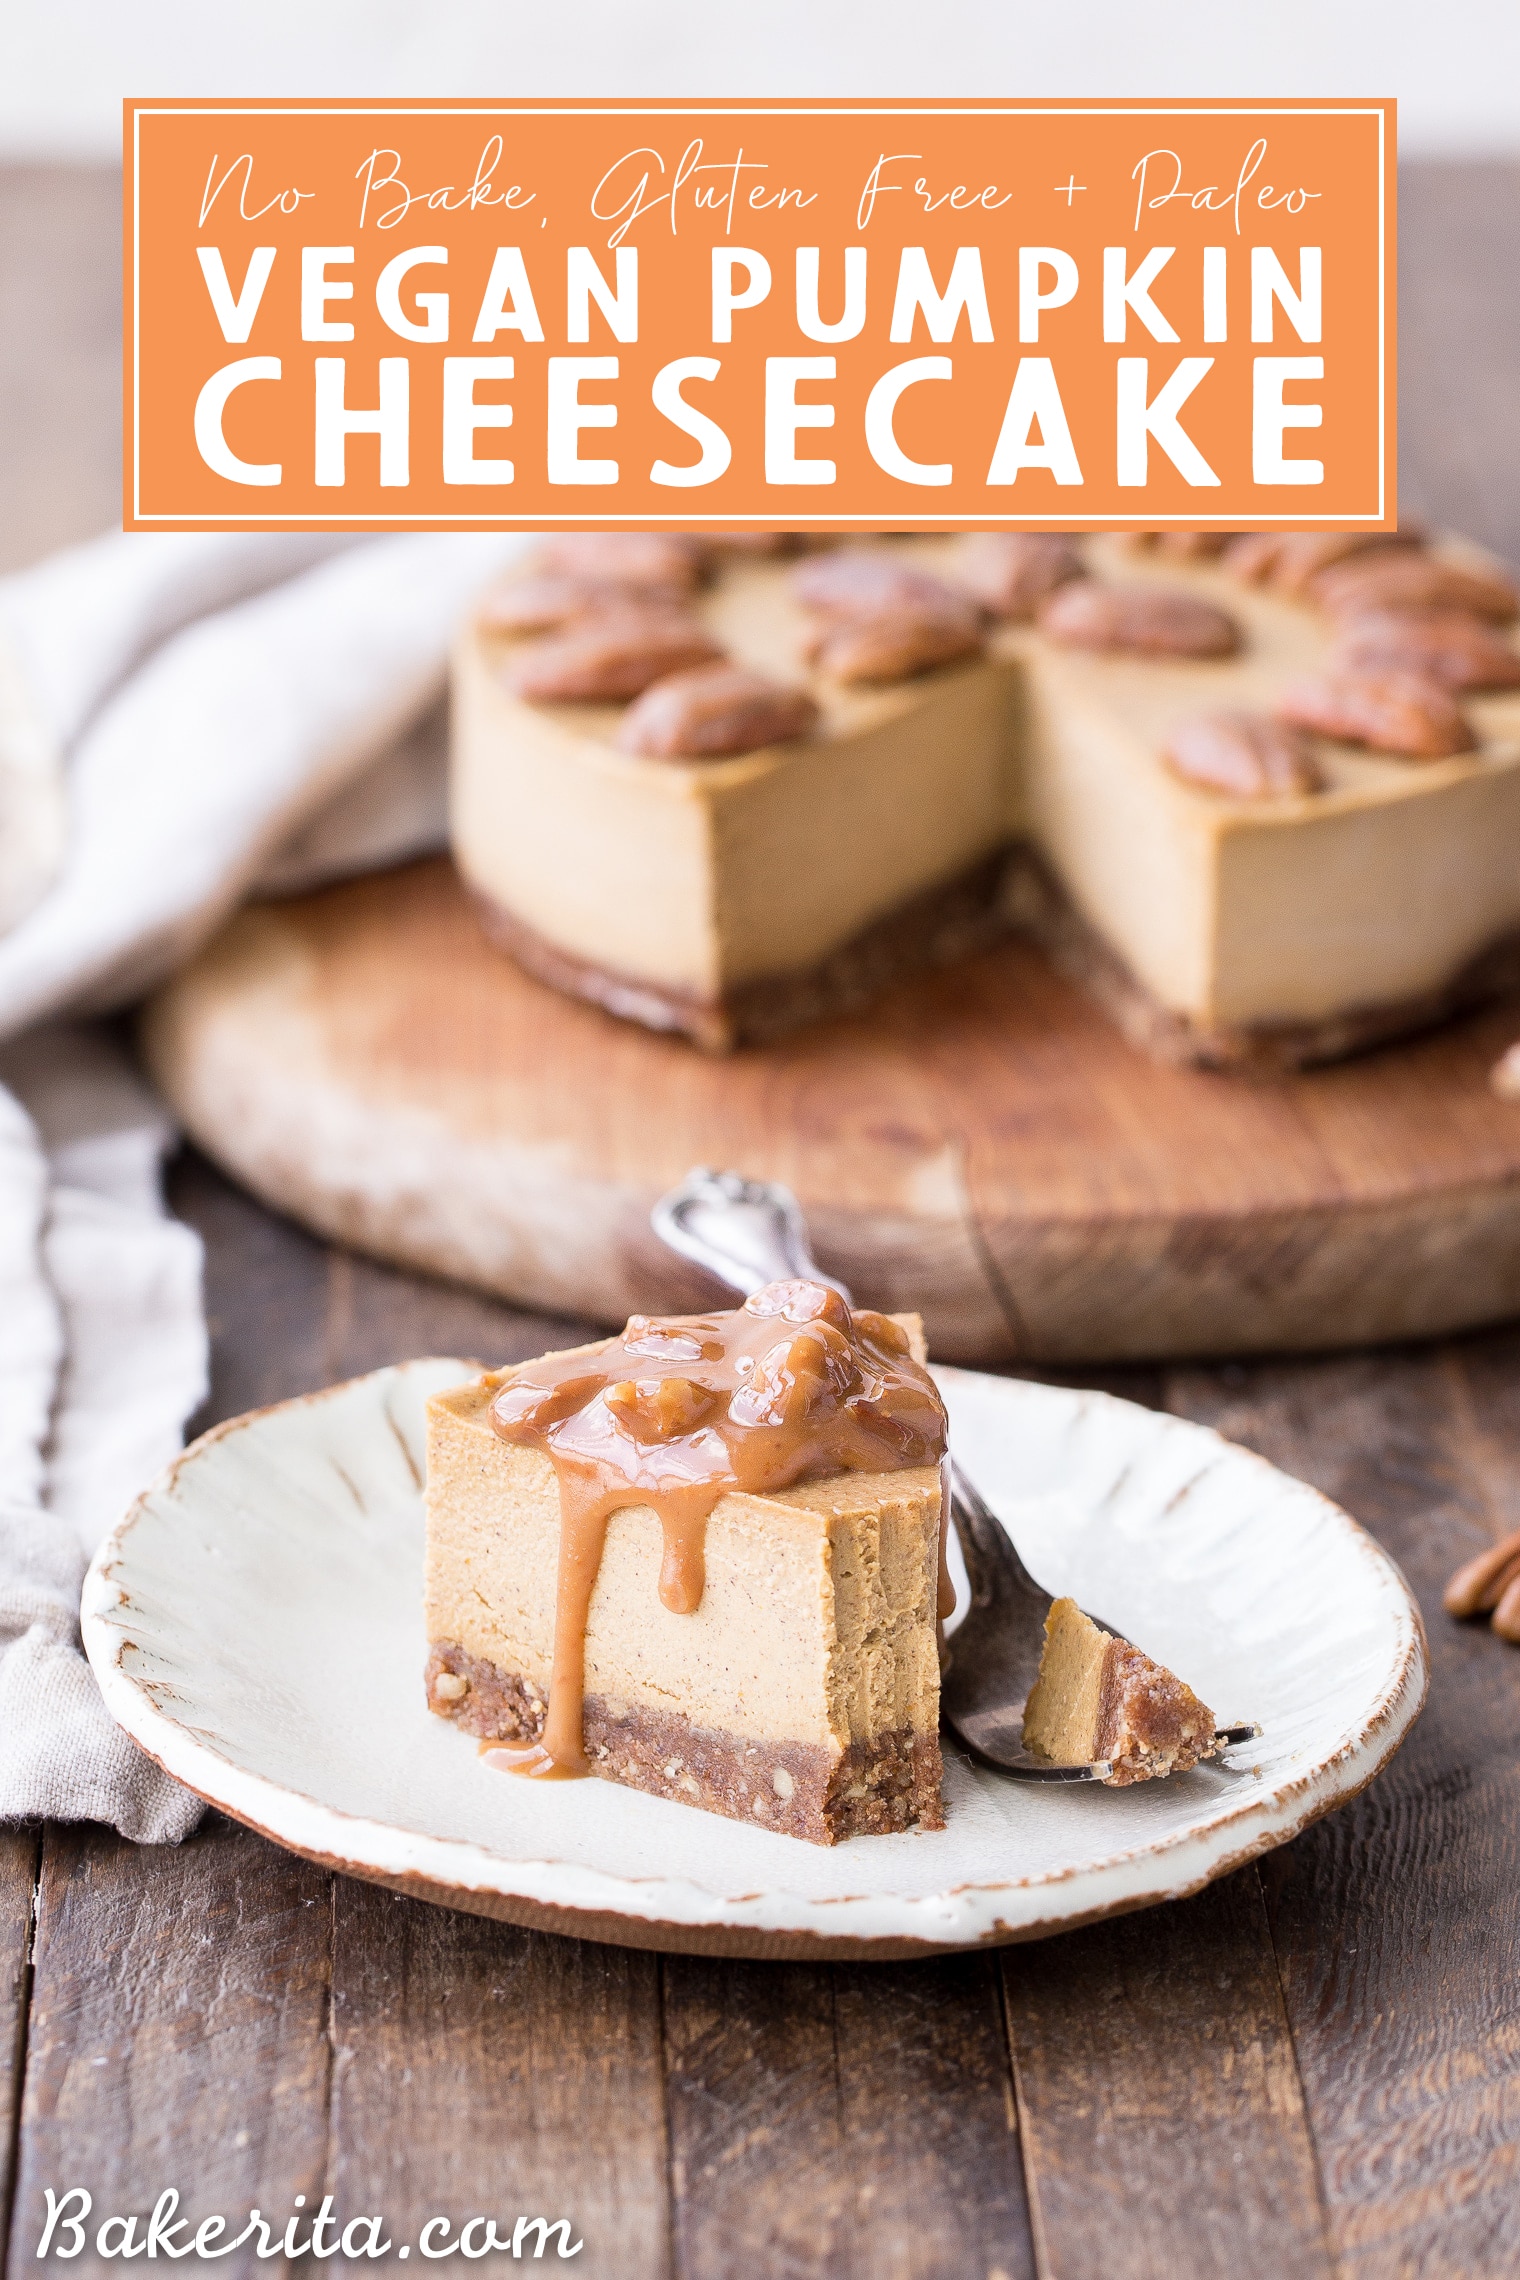 You'll love this super creamy No-Bake Vegan Pumpkin Cheesecake! It has a pecan crust and a spiced pumpkin cheesecake filling that's made with soaked cashews. This healthier pumpkin cheesecake is gluten-free, dairy-free, paleo + vegan, and absolutely perfect for the holidays.